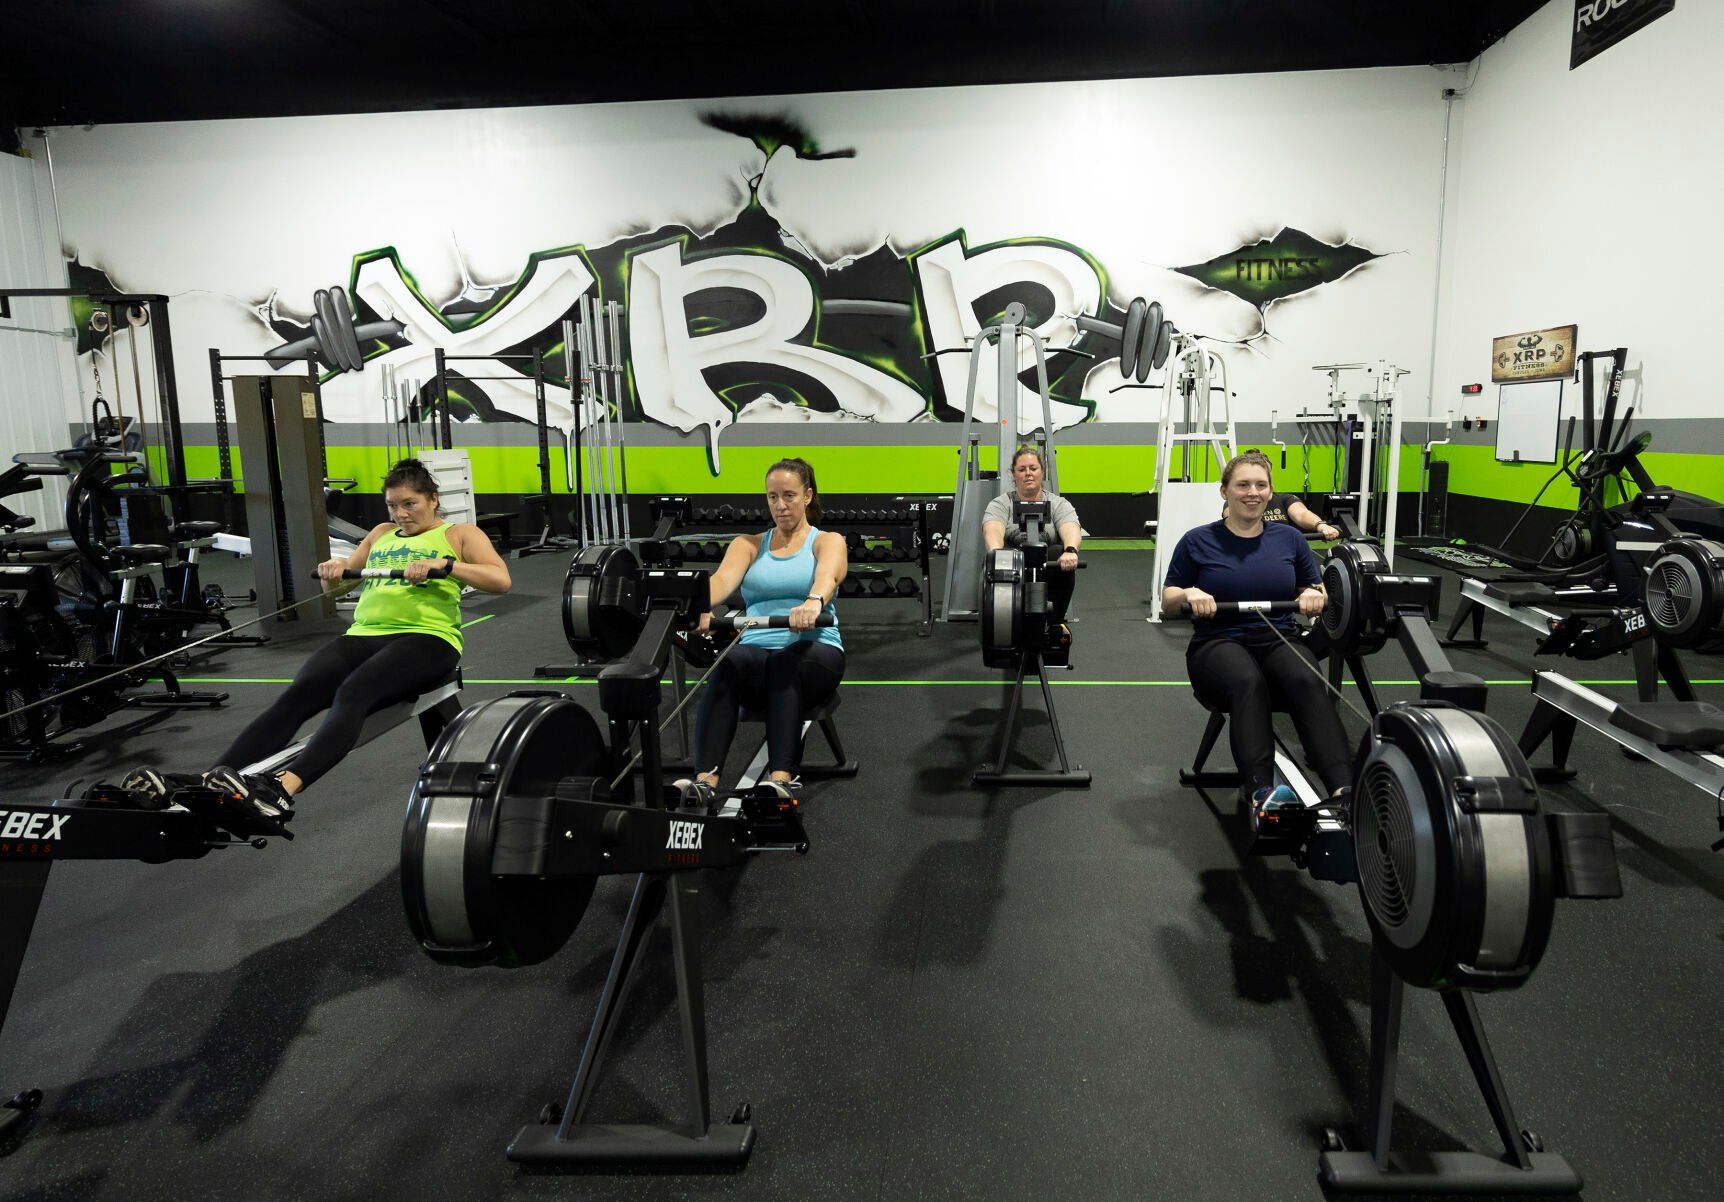 Students take part in a class at recently opened XRP Fitness, 190 N. Crescent Ridge, in Dubuque.    PHOTO CREDIT: Stephen Gassman